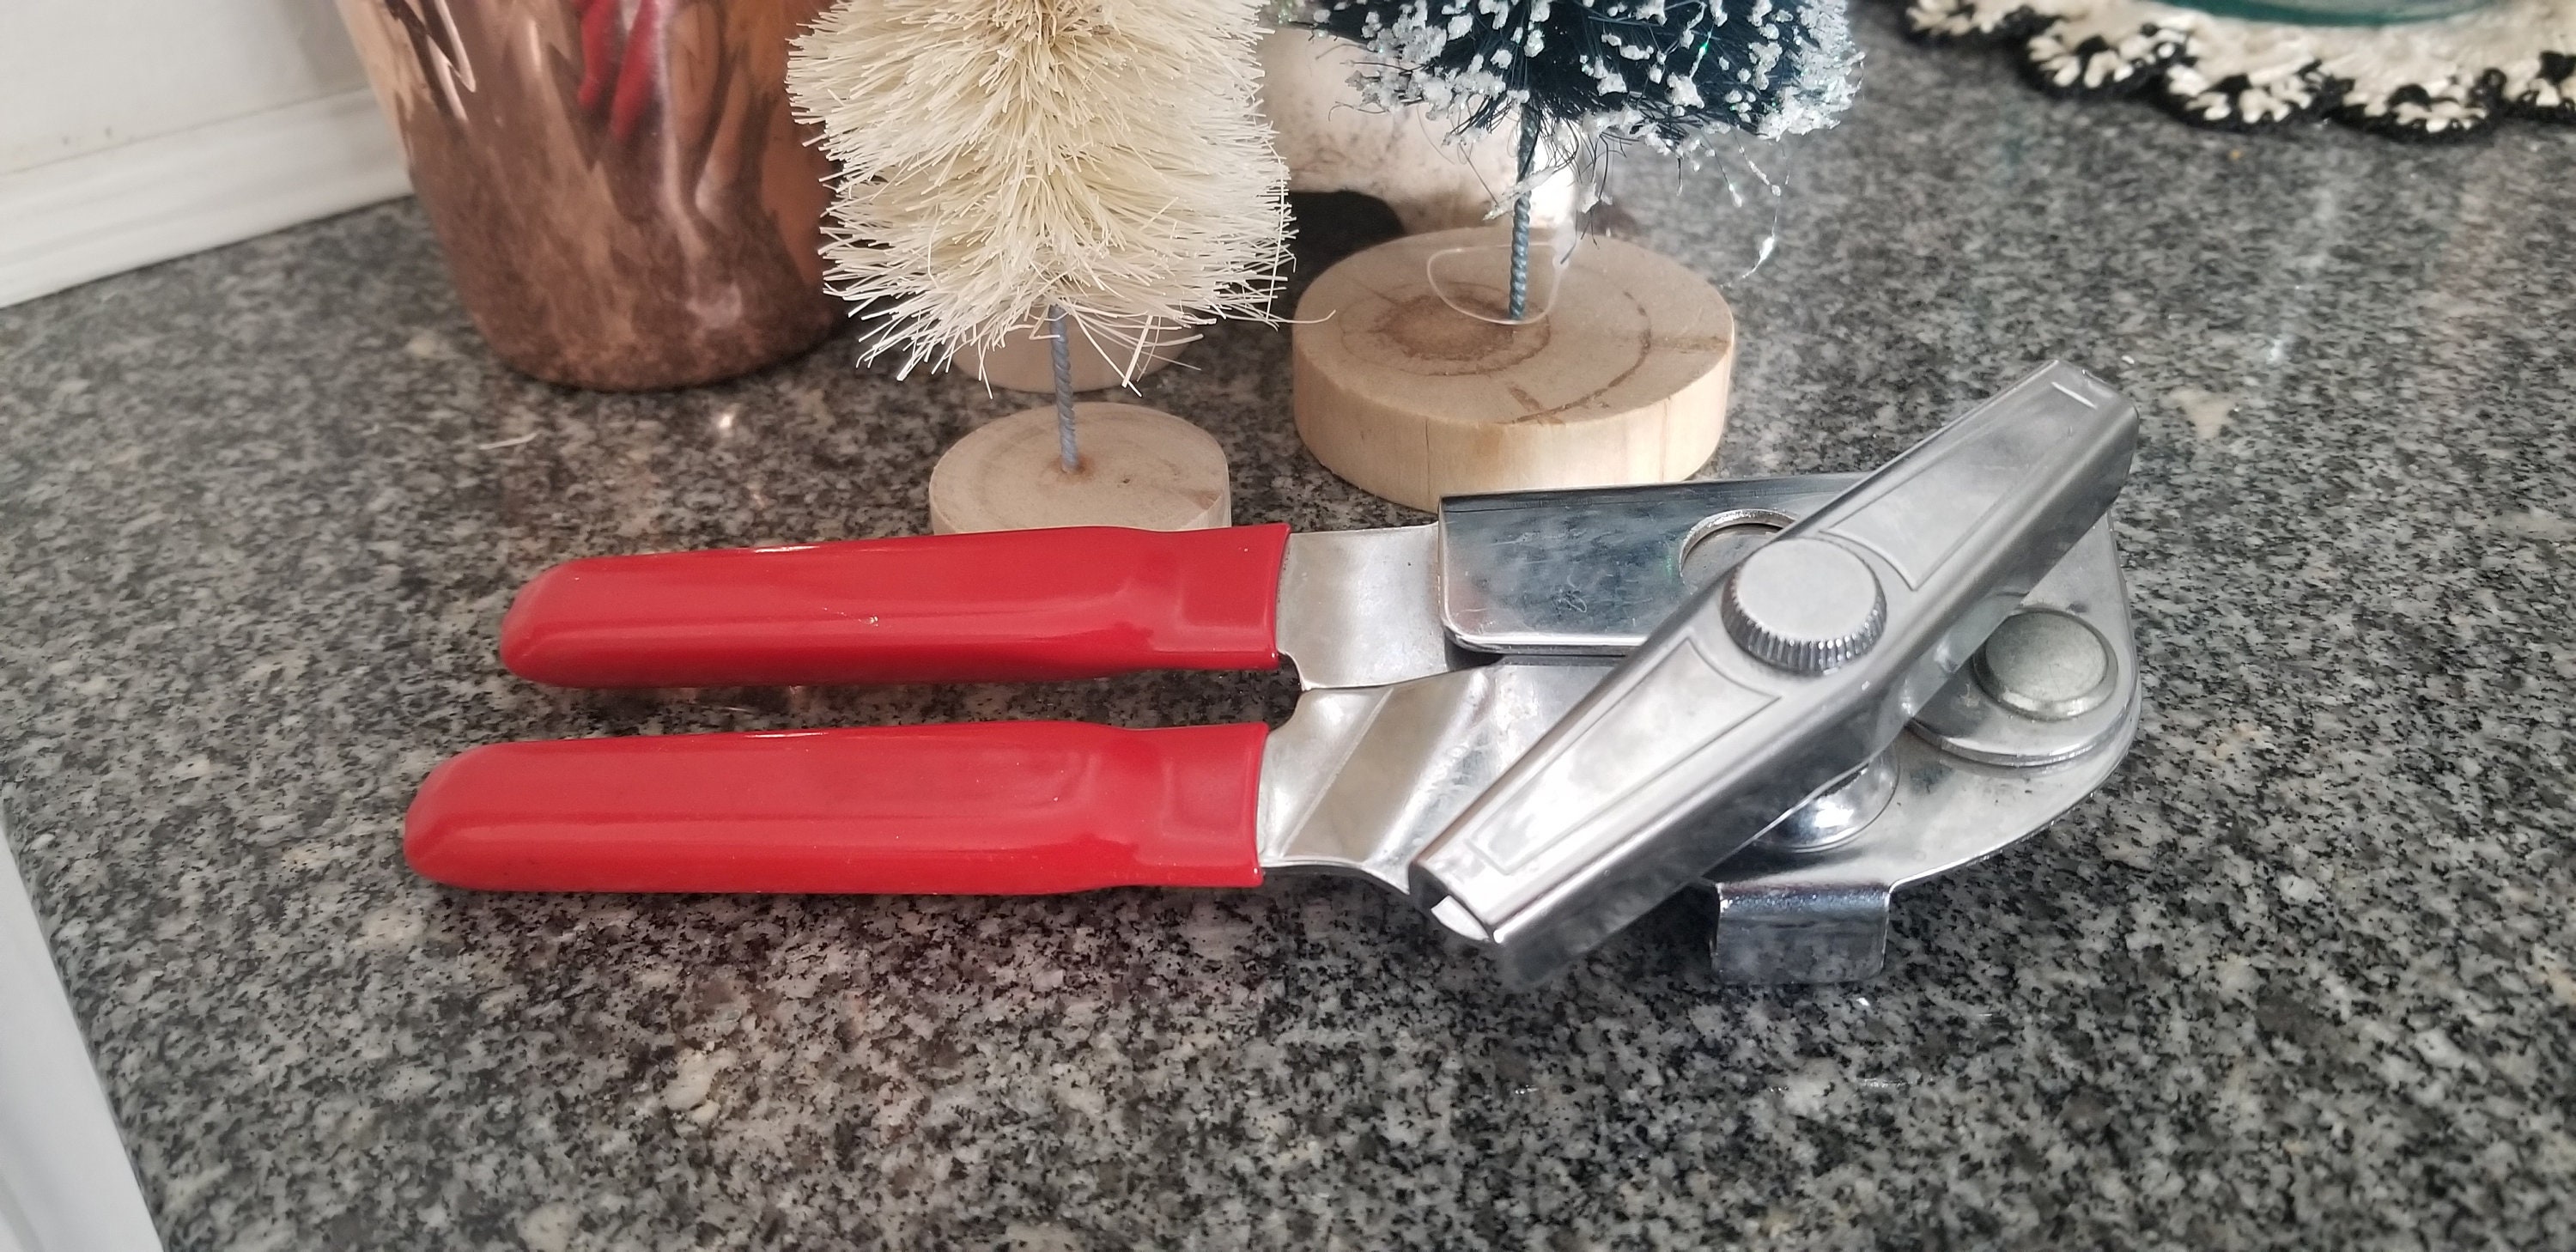 Vintage Swing-Away Manual Wall Mount Can Opener with Red Handle and Bracket